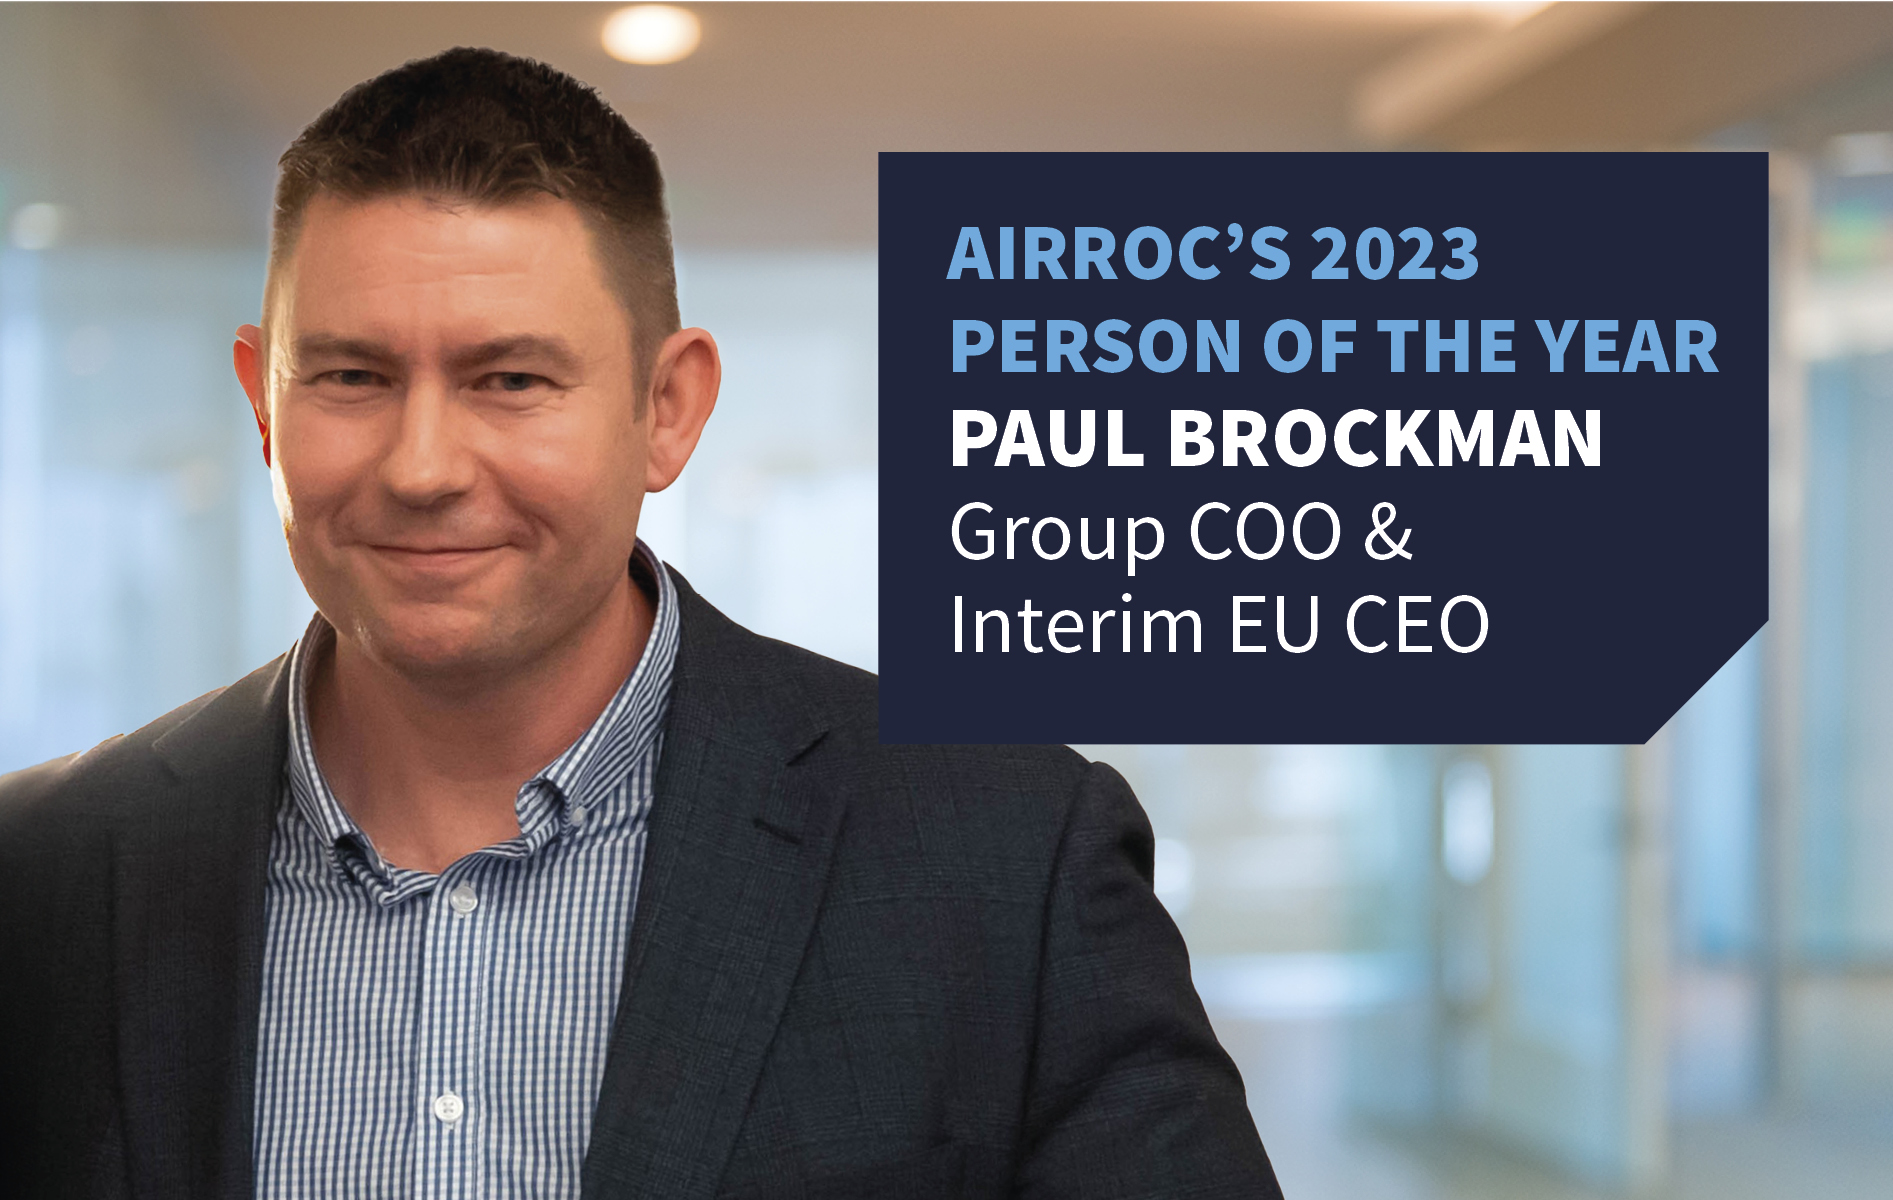 Getting to know Paul Brockman, AIRROC 2023 Person of the Year